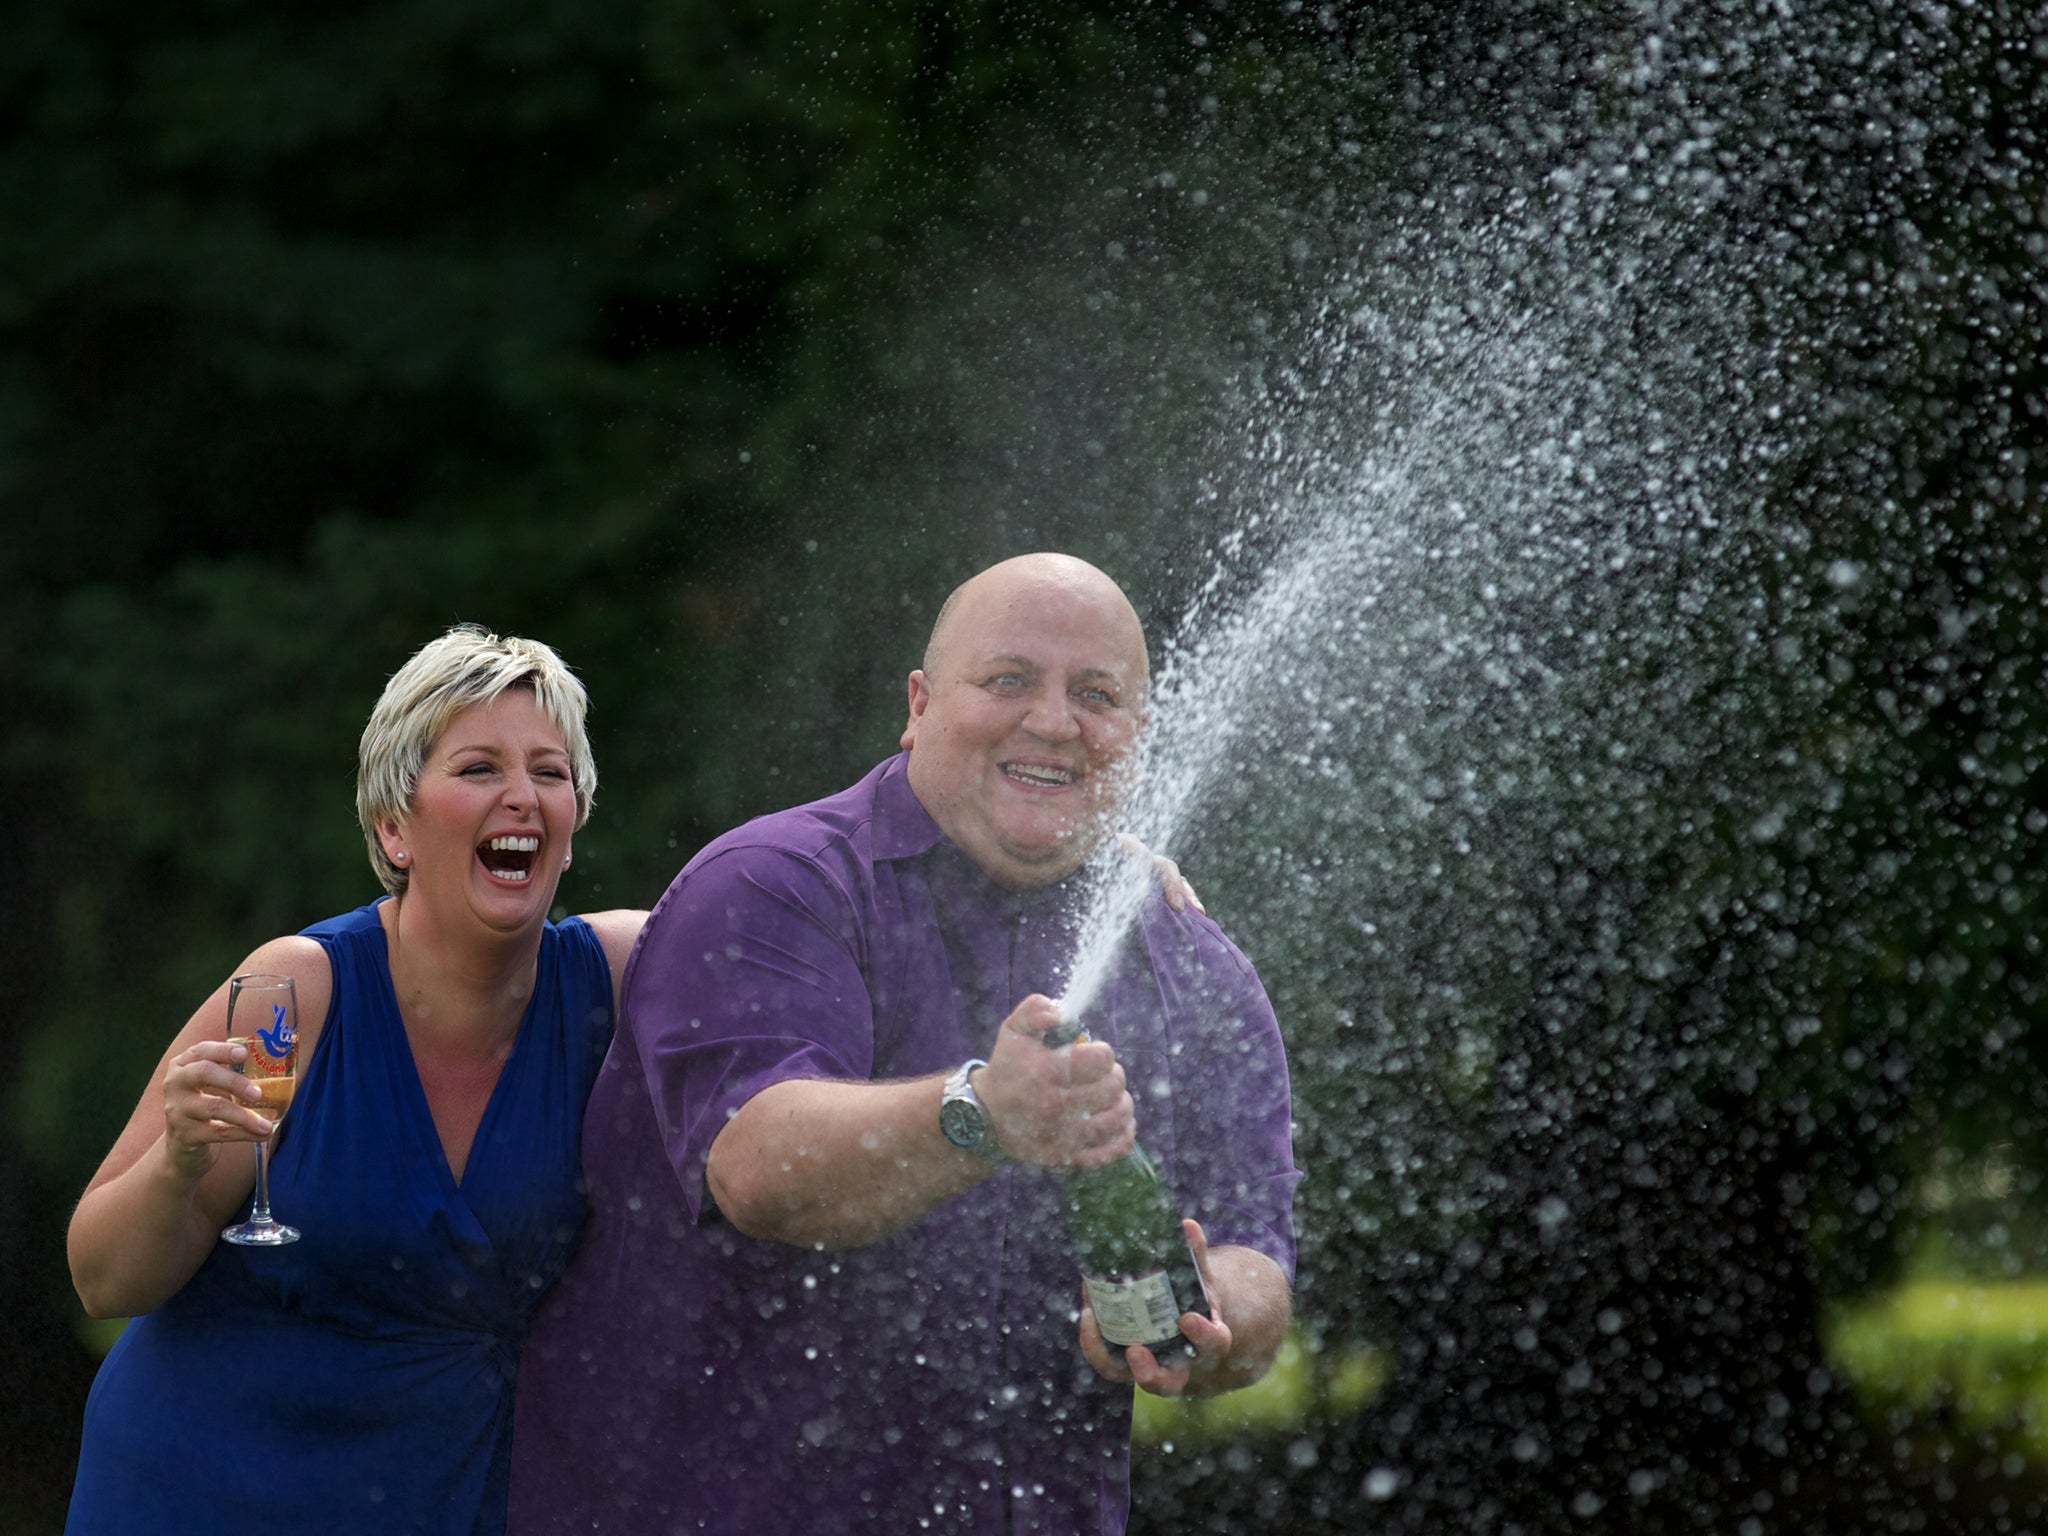 91 UK ticket holders have won the EuroMillions jackpot or a share of the jackpot prize